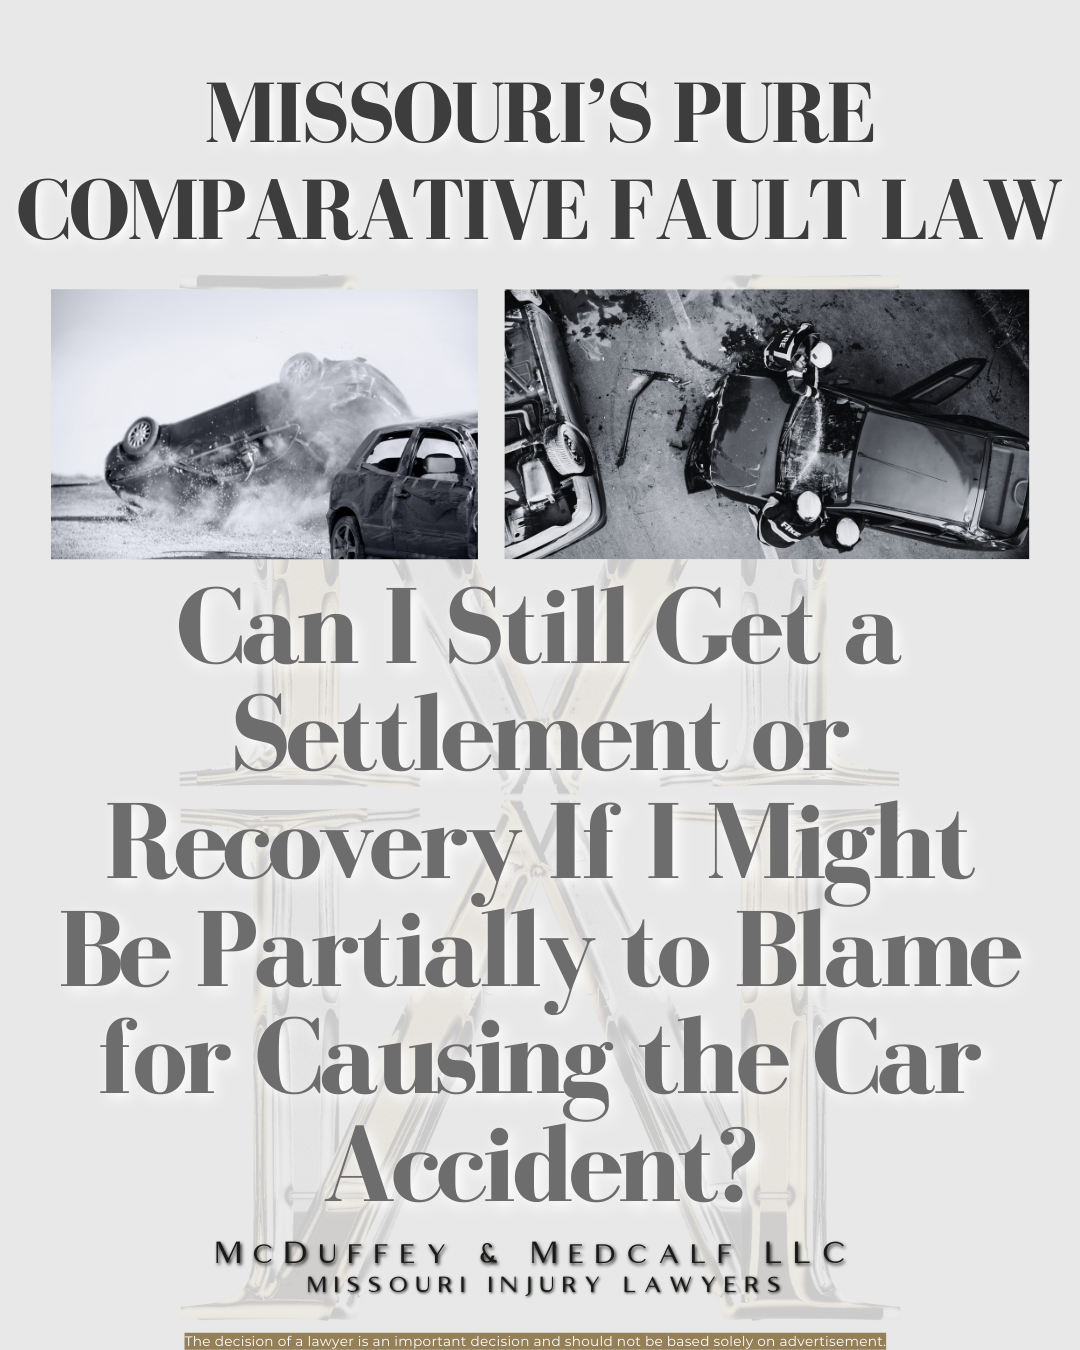 Can I Still Get a Settlement or Recovery If I Might Be Partially to Blame for Causing the Car Accident?